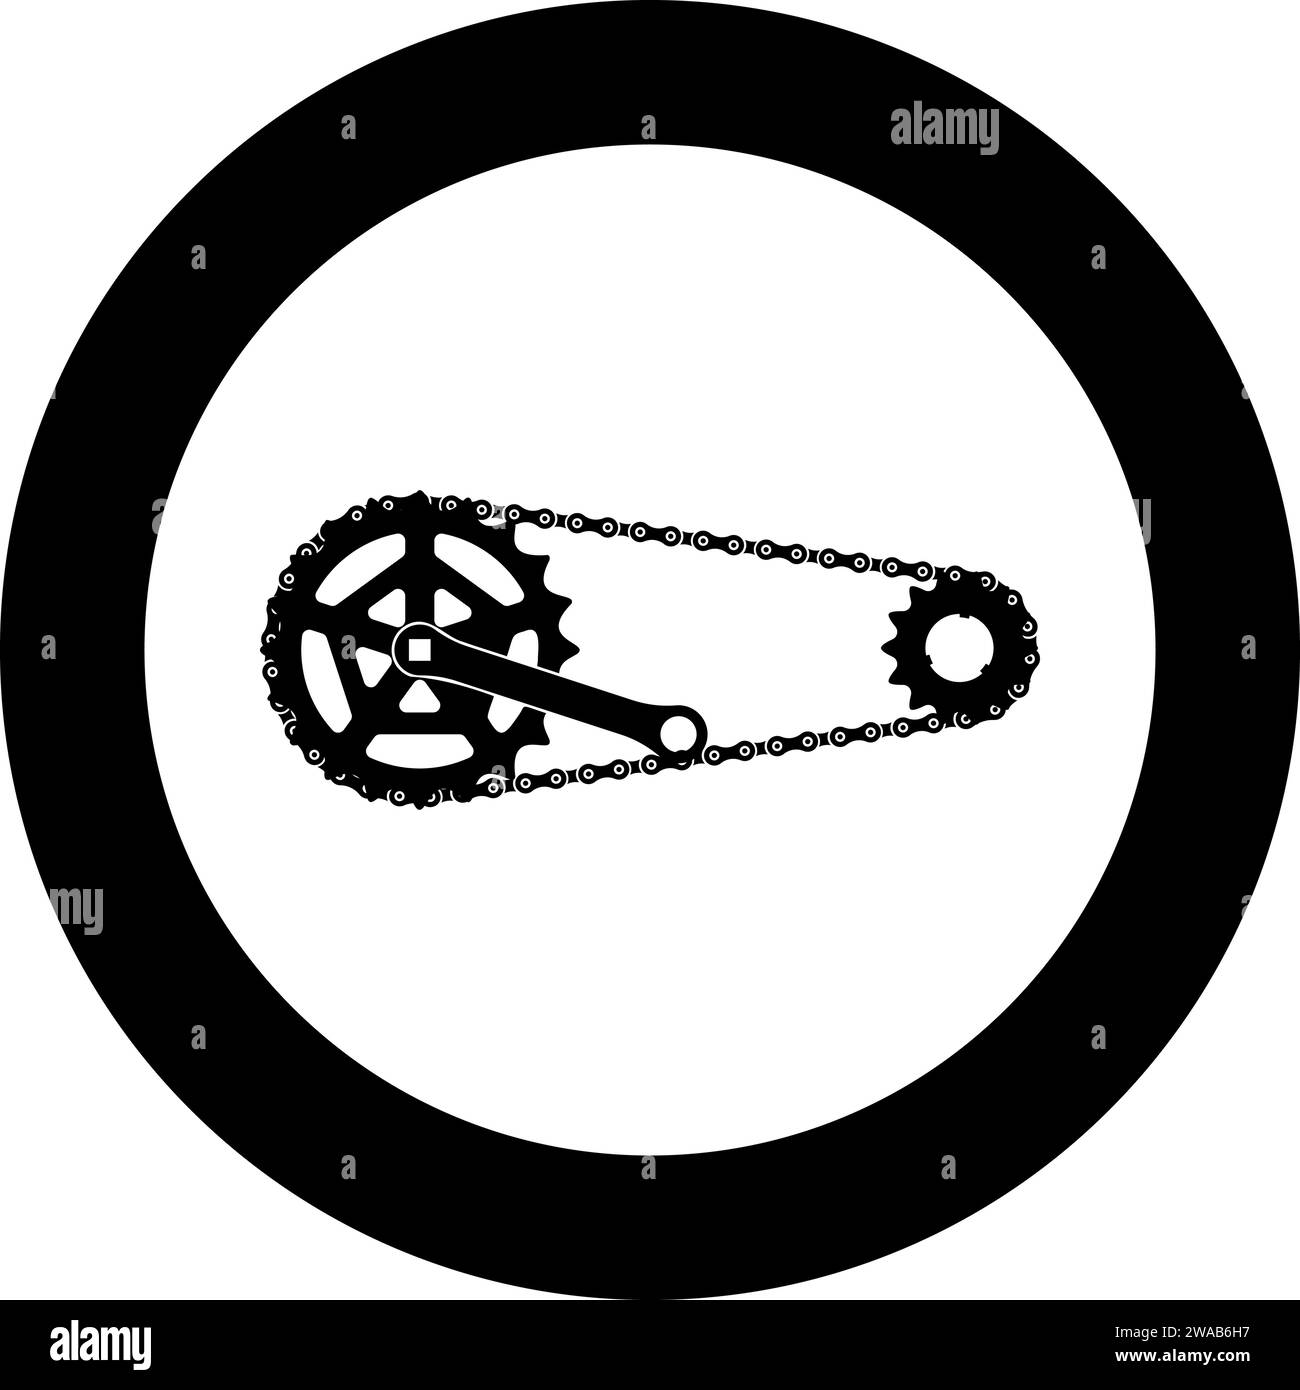 Chain bicycle link bike motorcycle two element crankset cogwheel sprocket crank length with gear for bicycle cassette system bike icon in circle Stock Vector